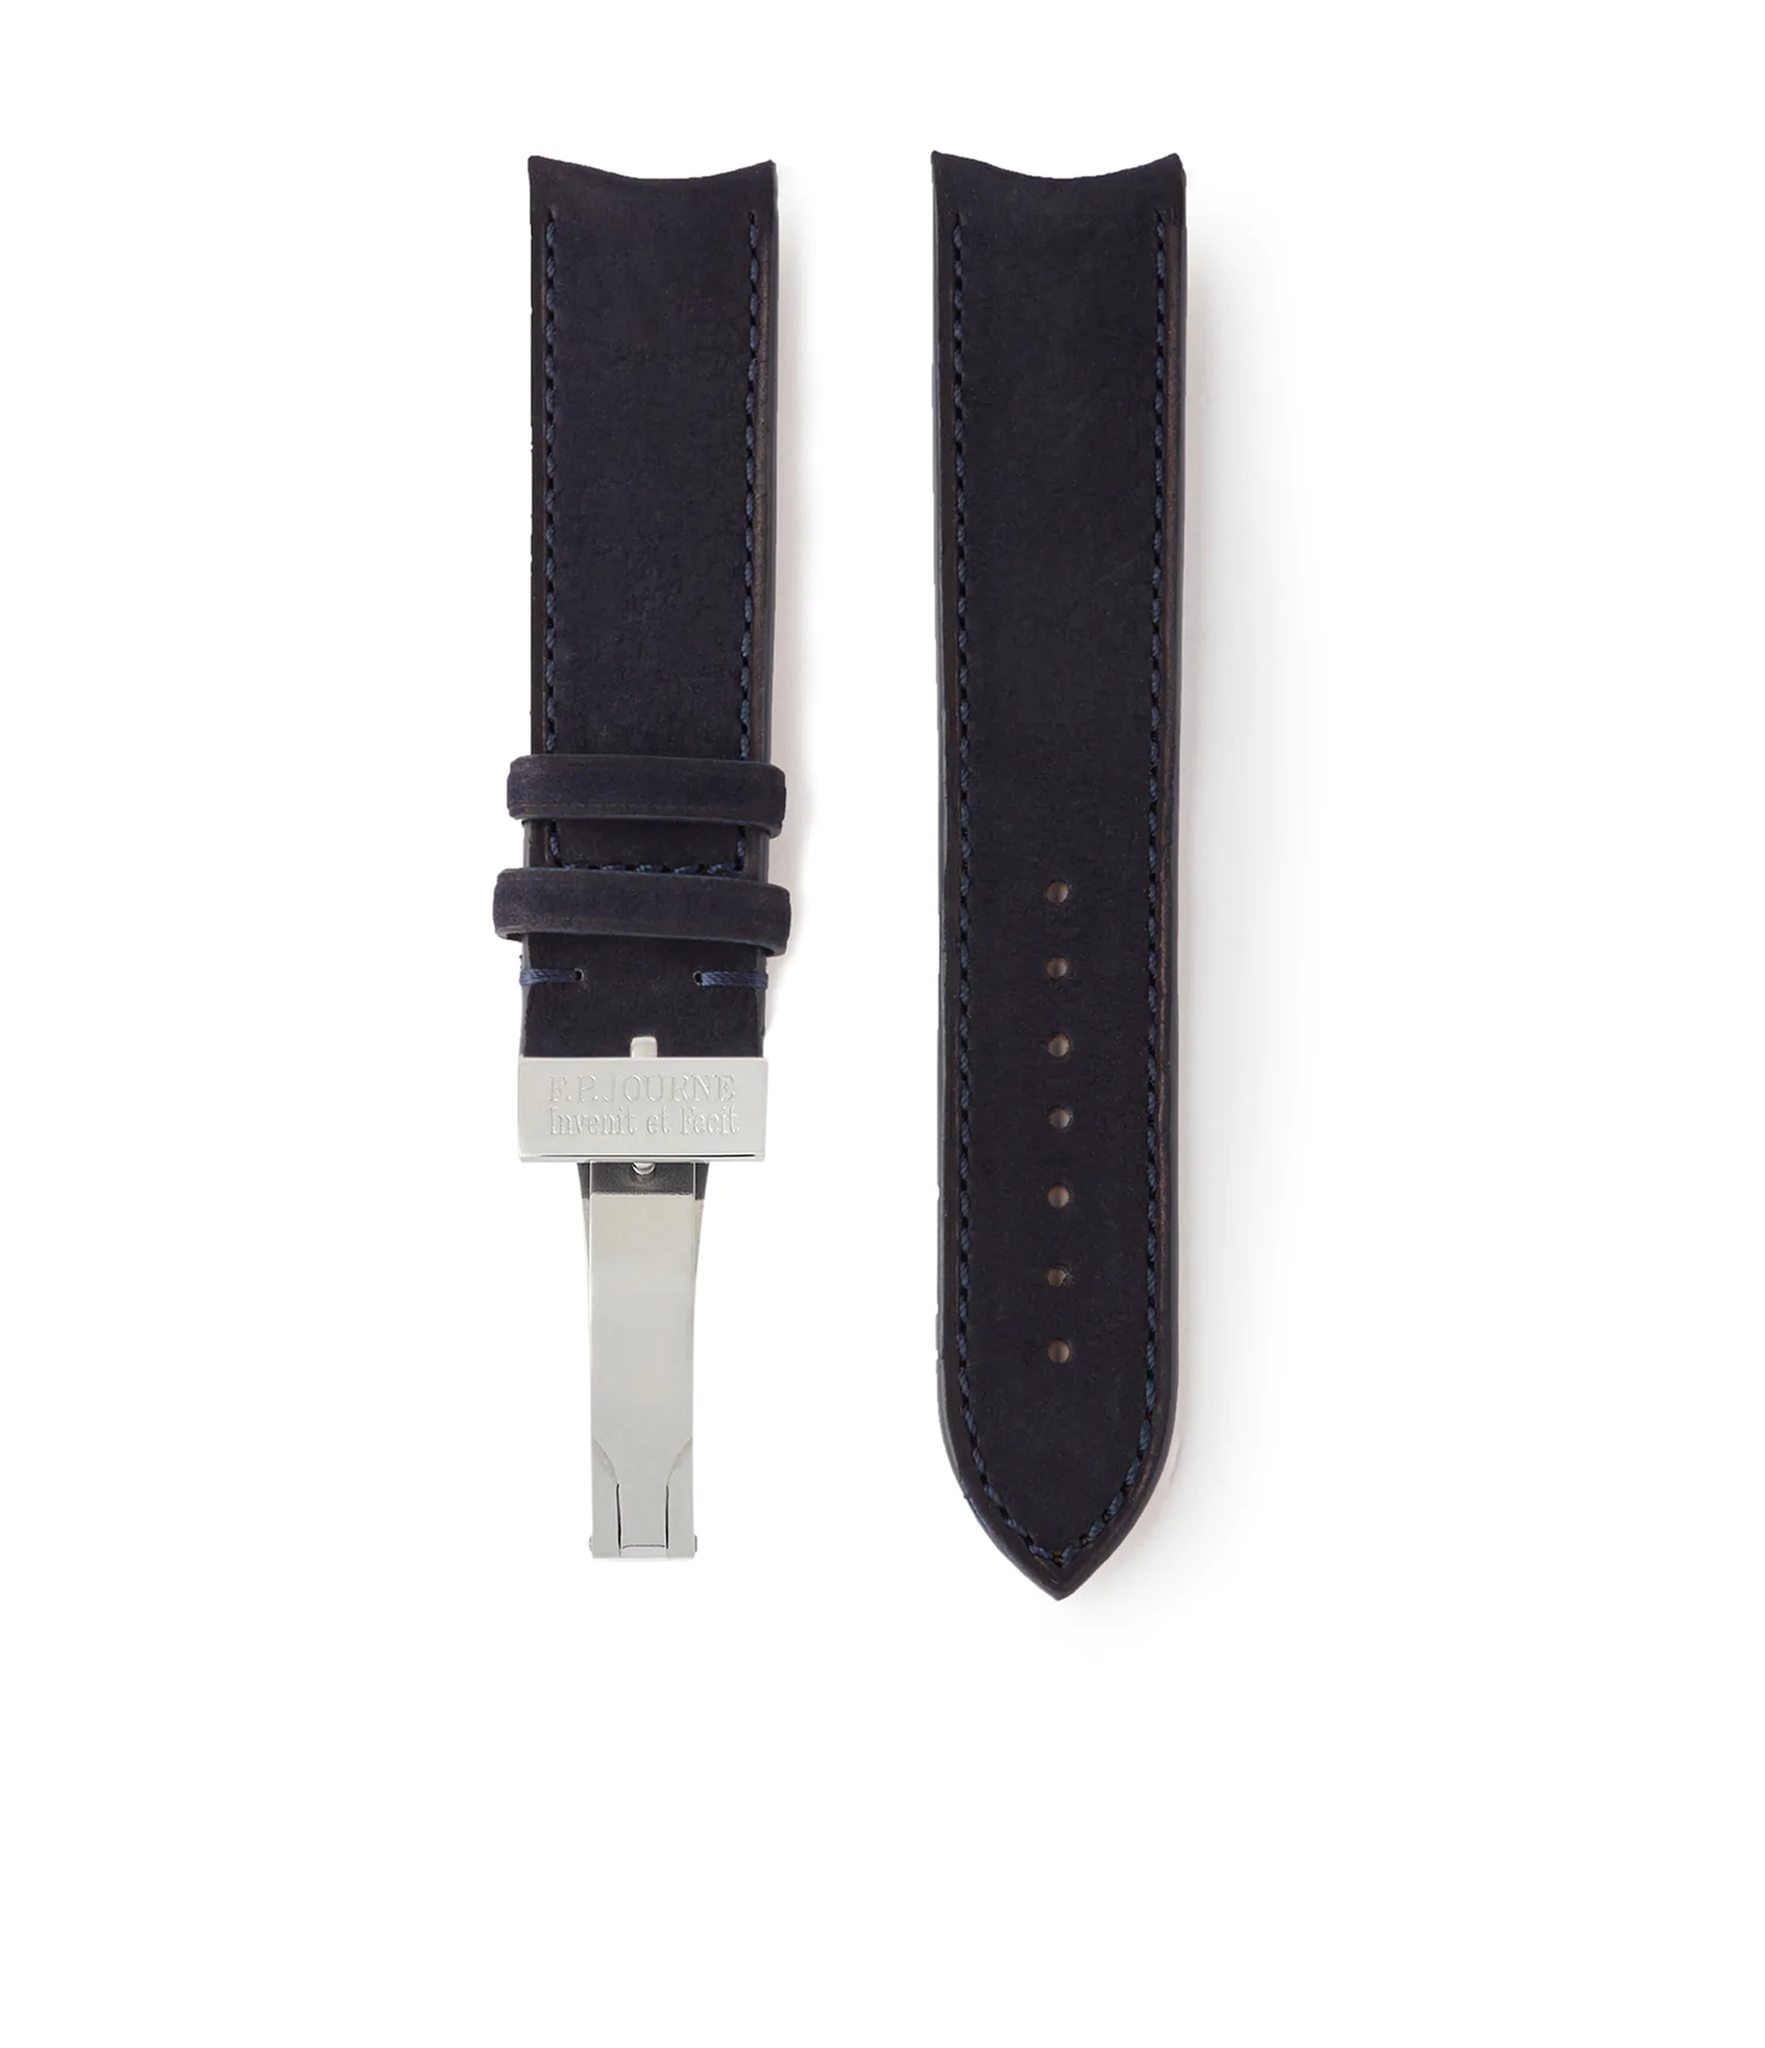 Buy nubuck quality watch strap in starry night blue from A Collected Man London, in short or regular lengths. We are proud to offer these hand-crafted watch straps, thoughtfully made in Europe, to suit your watch. Available to order online for worldwide delivery.